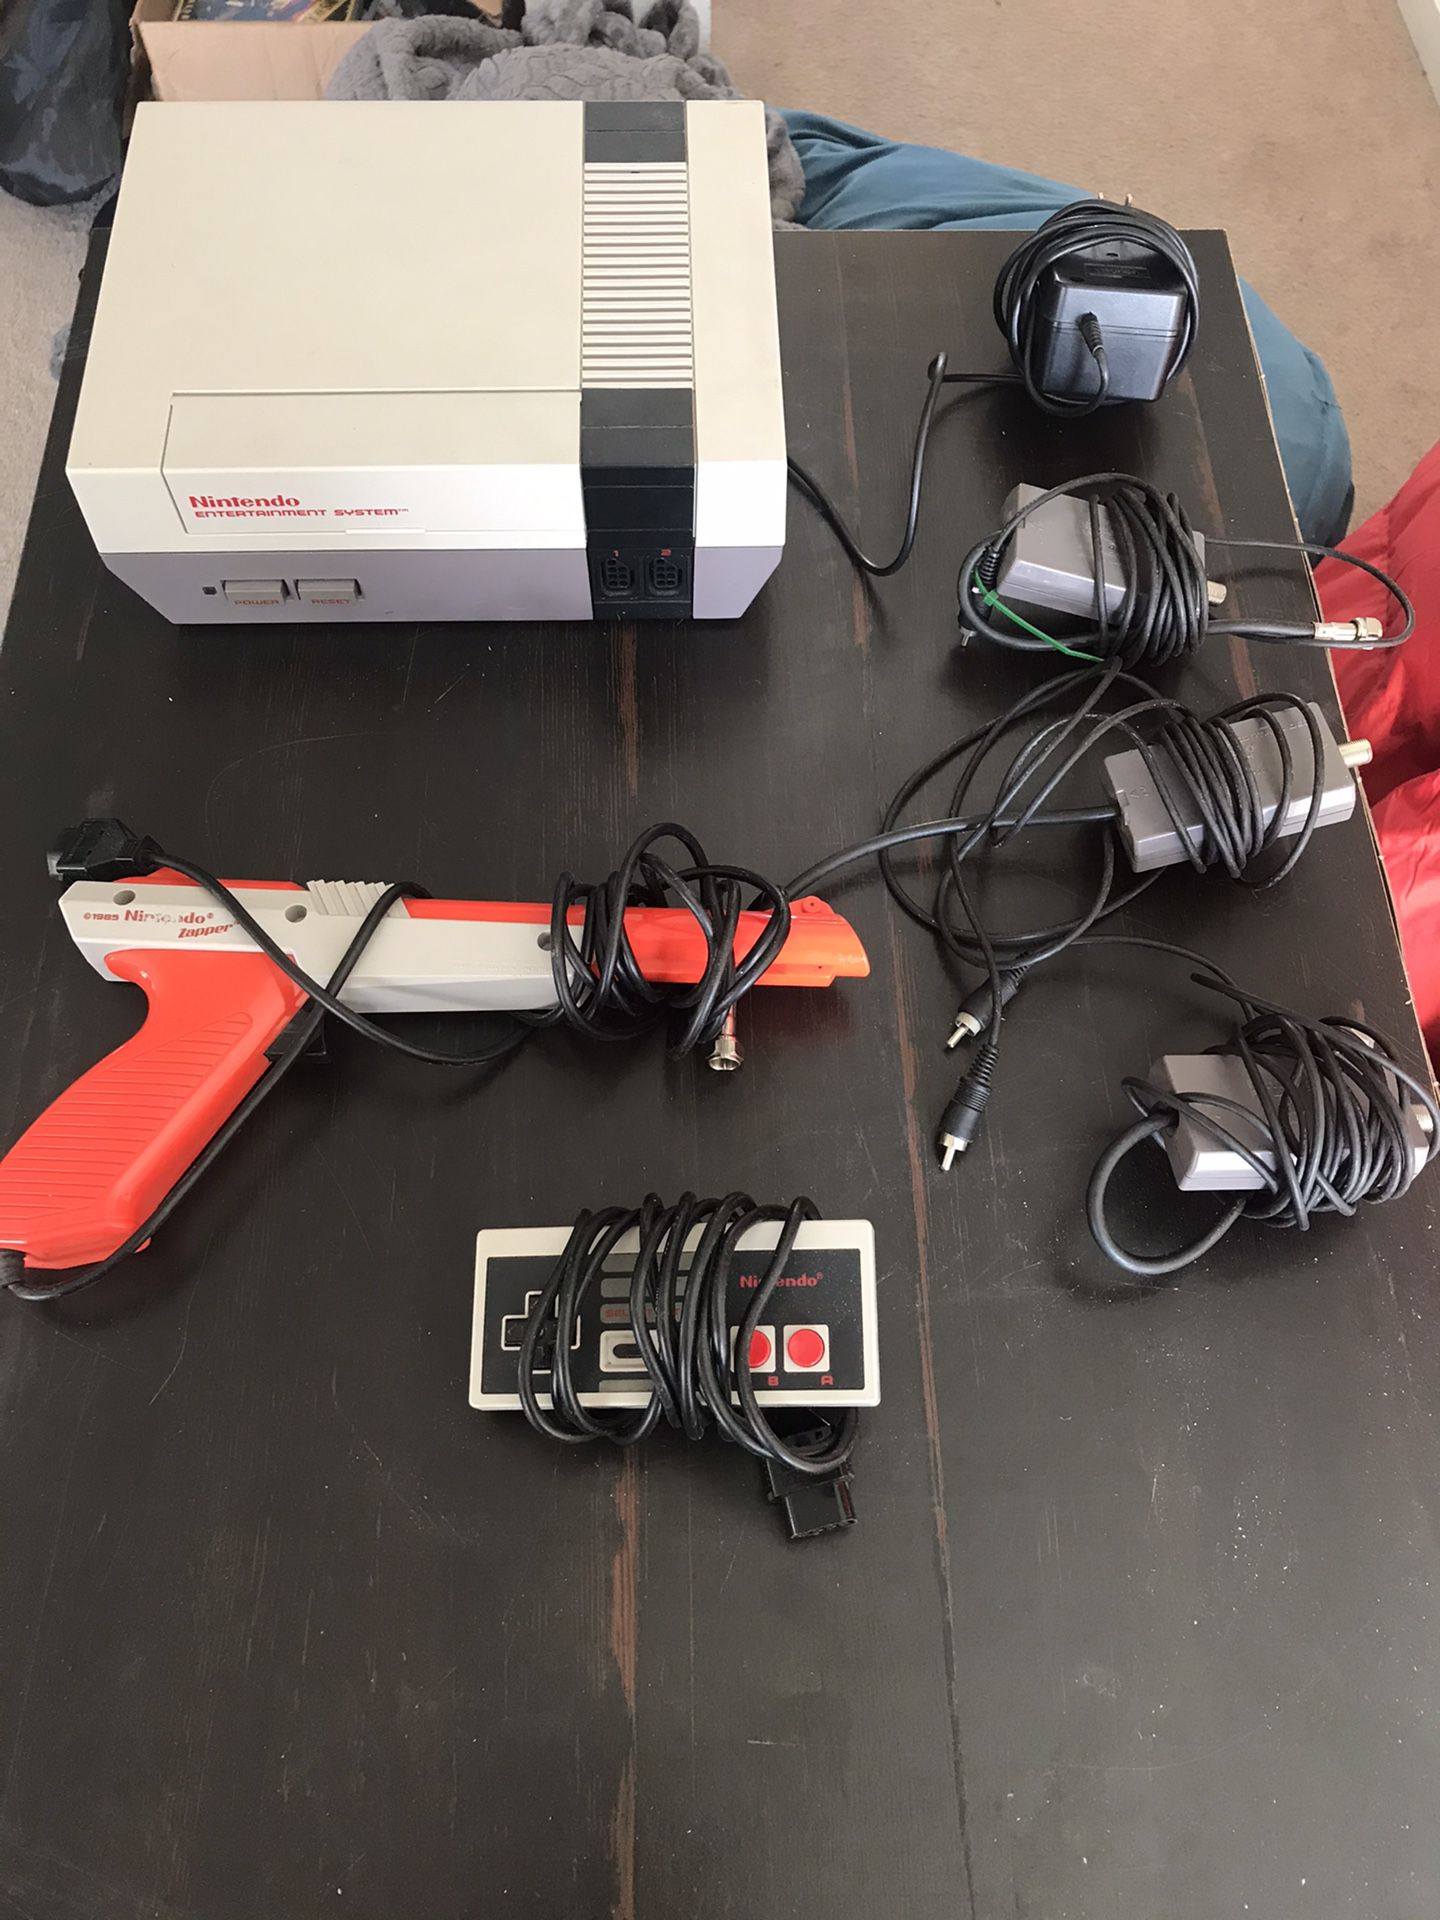 Nintendo NES system with over 100 games